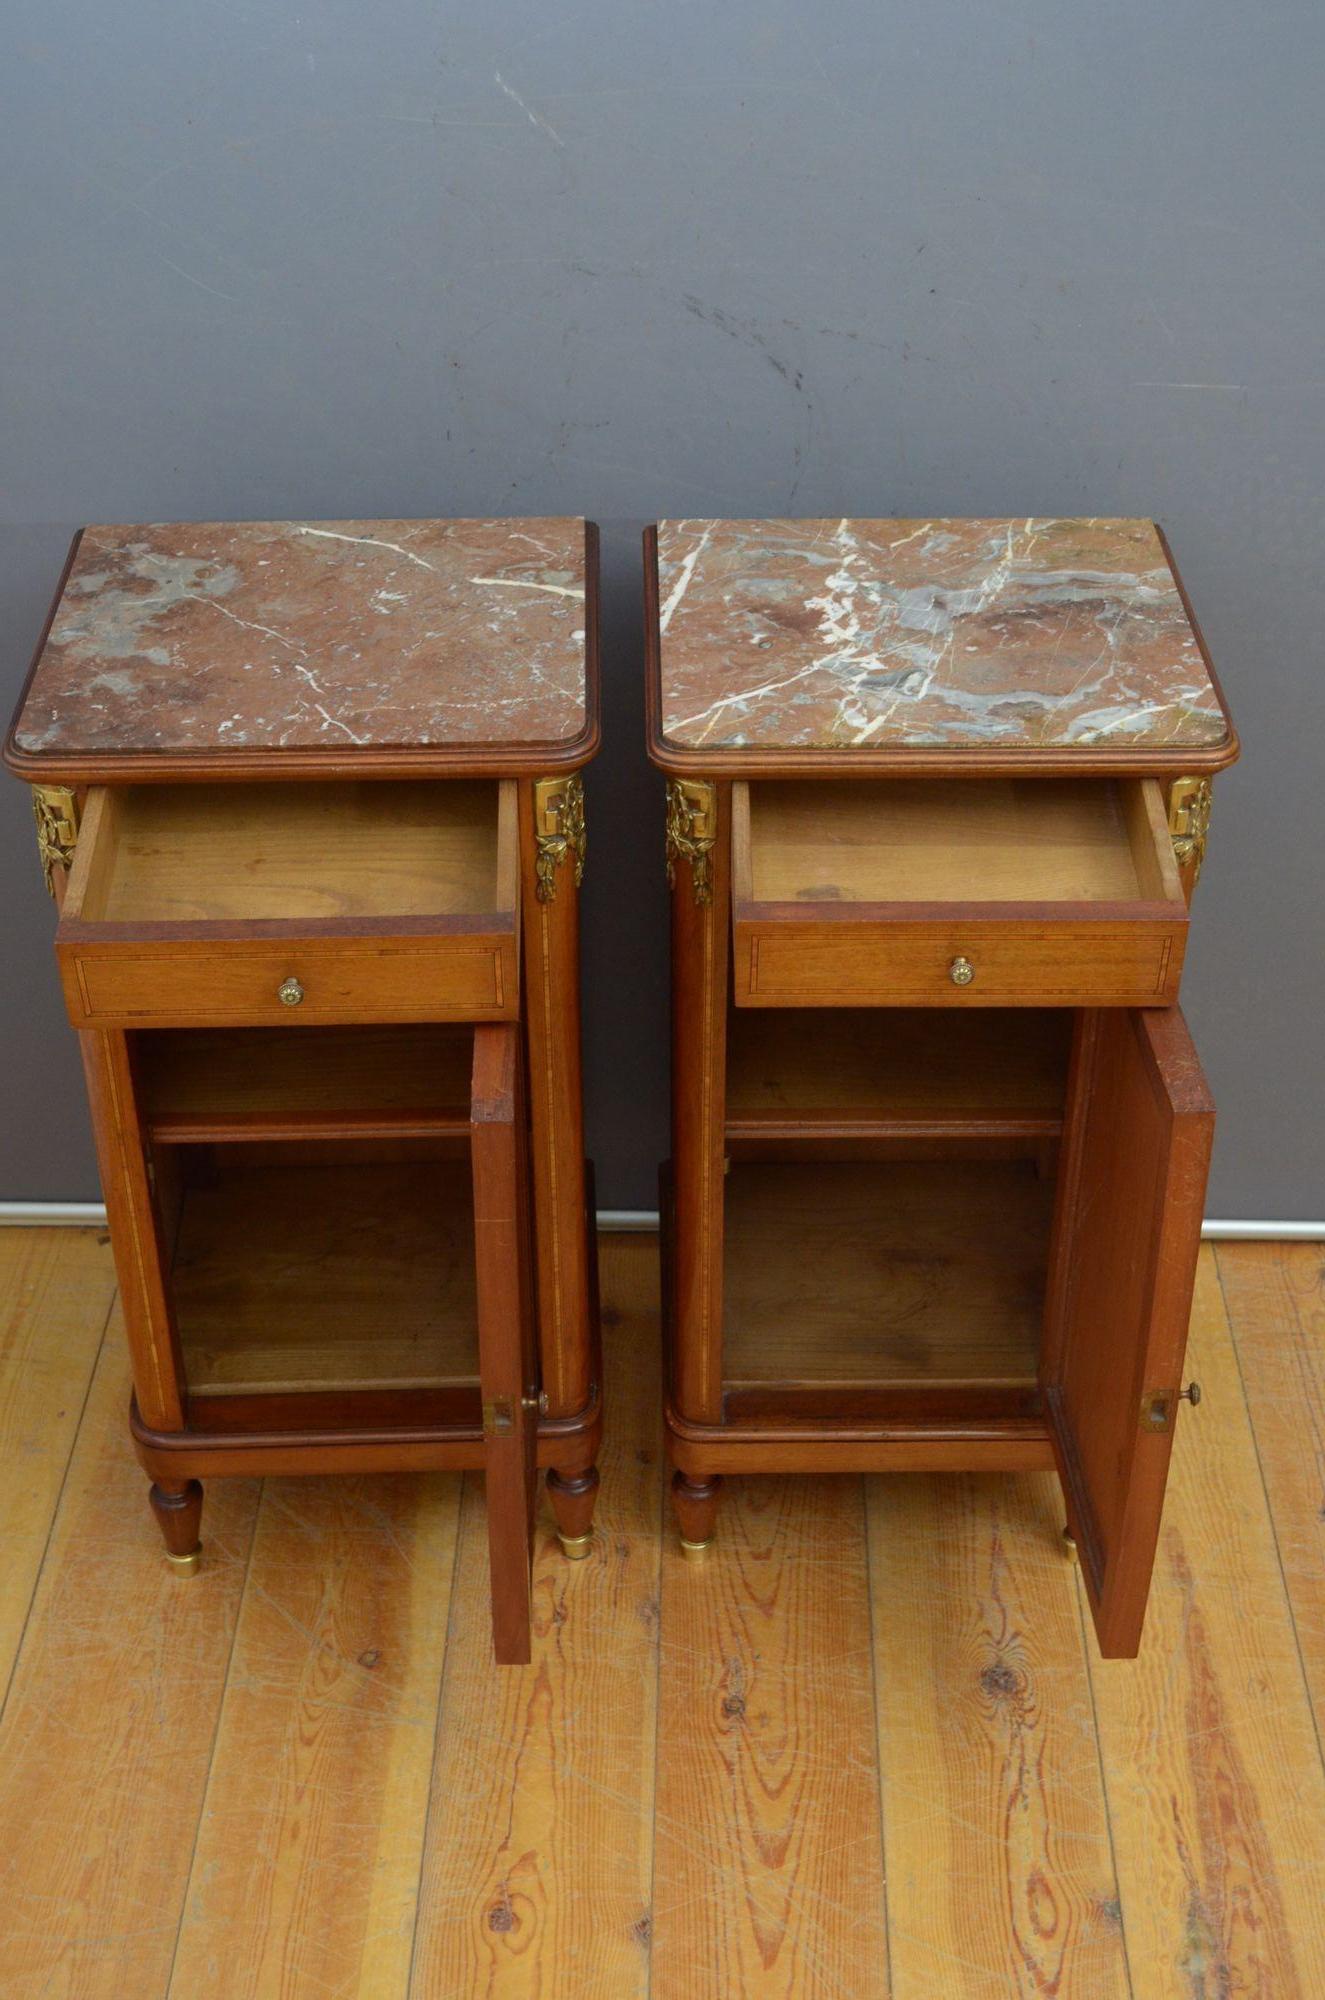 Pair of Turn of the Century Bedside Cabinets in Mahogany In Good Condition For Sale In Whaley Bridge, GB